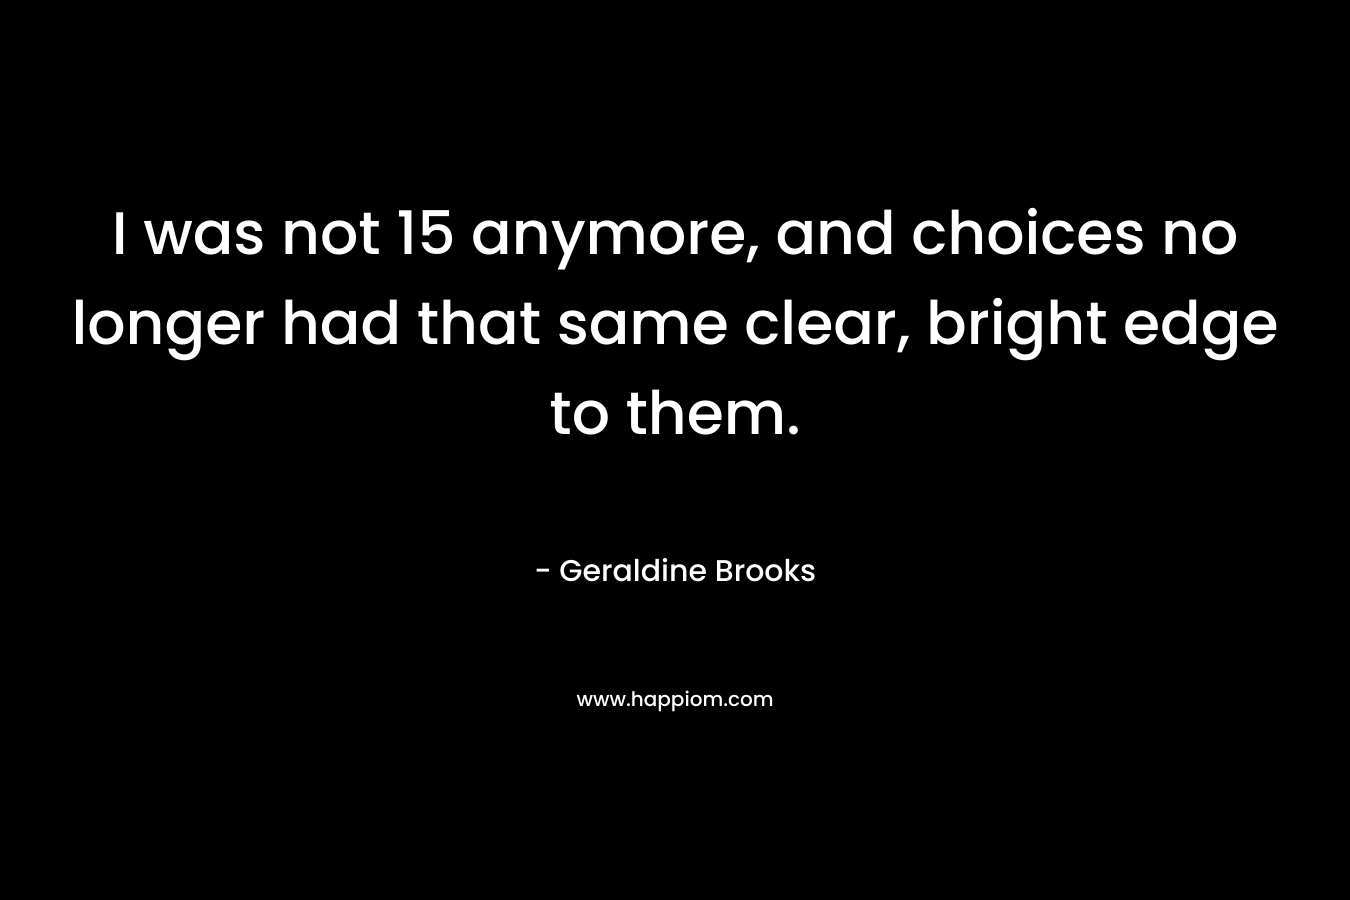 I was not 15 anymore, and choices no longer had that same clear, bright edge to them. – Geraldine Brooks